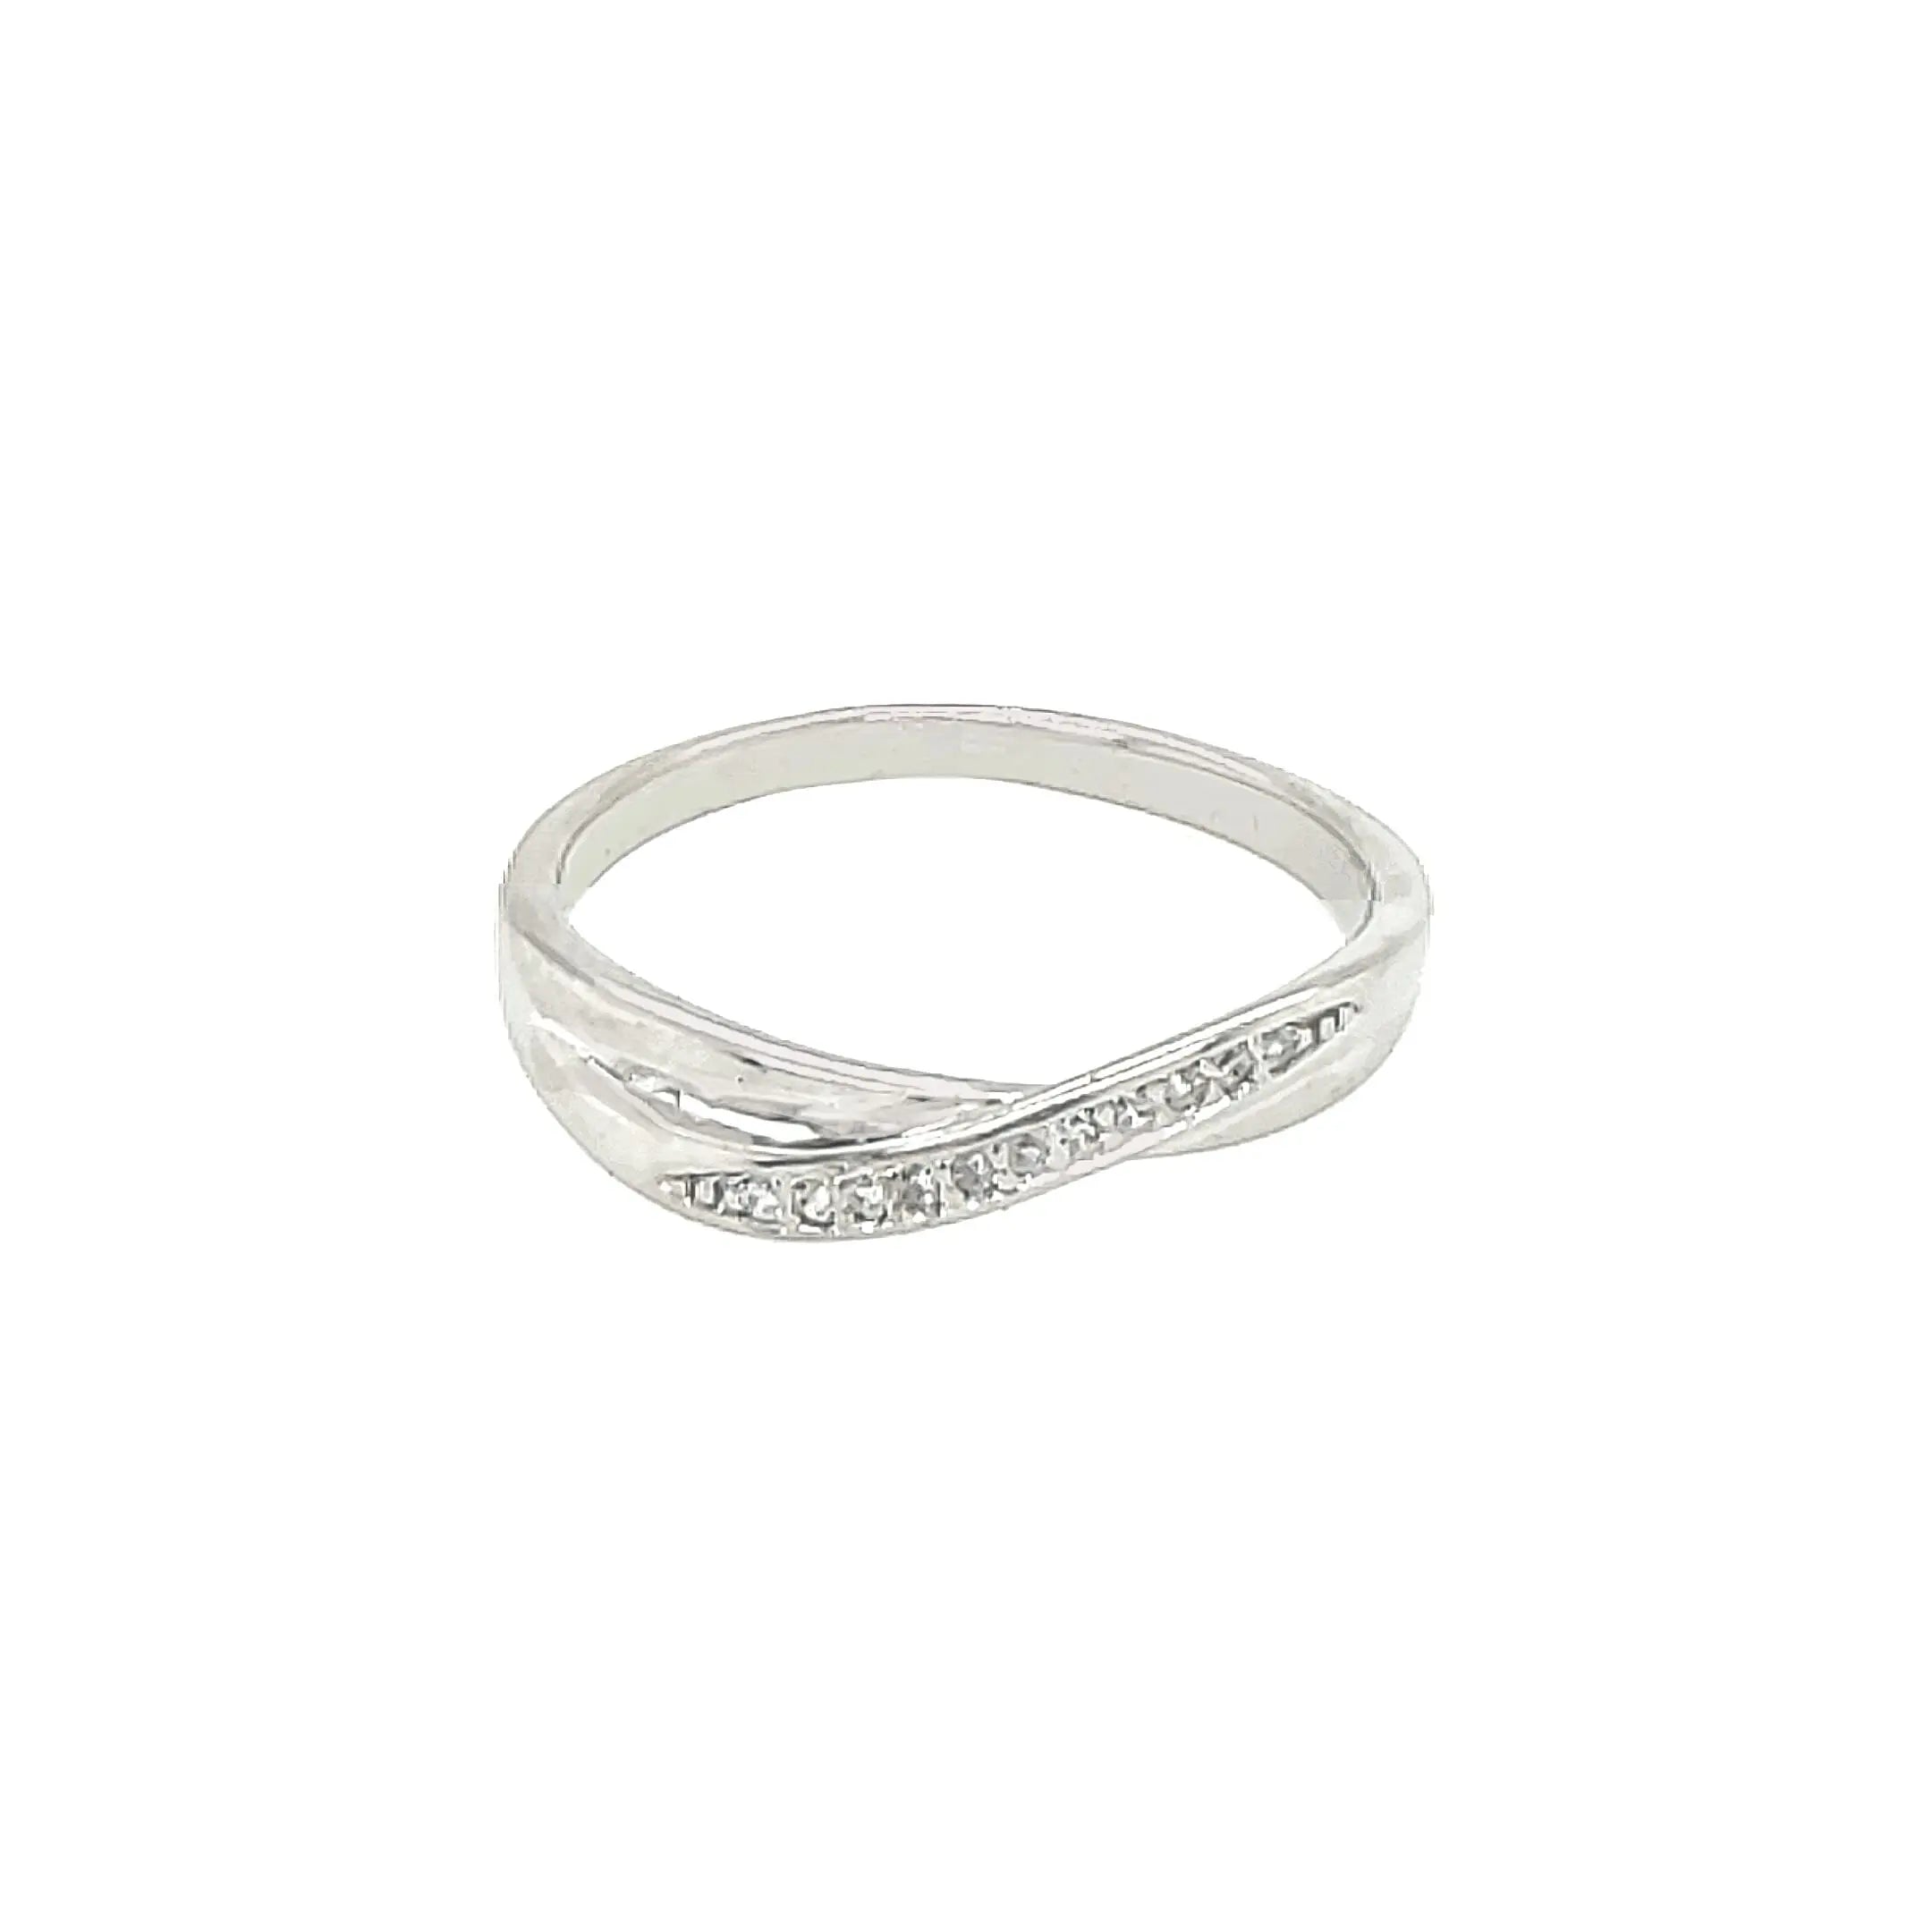 Asfour Crystal 925 Silver Two Lines With Clear Crystal Lobes Ring -  Silver